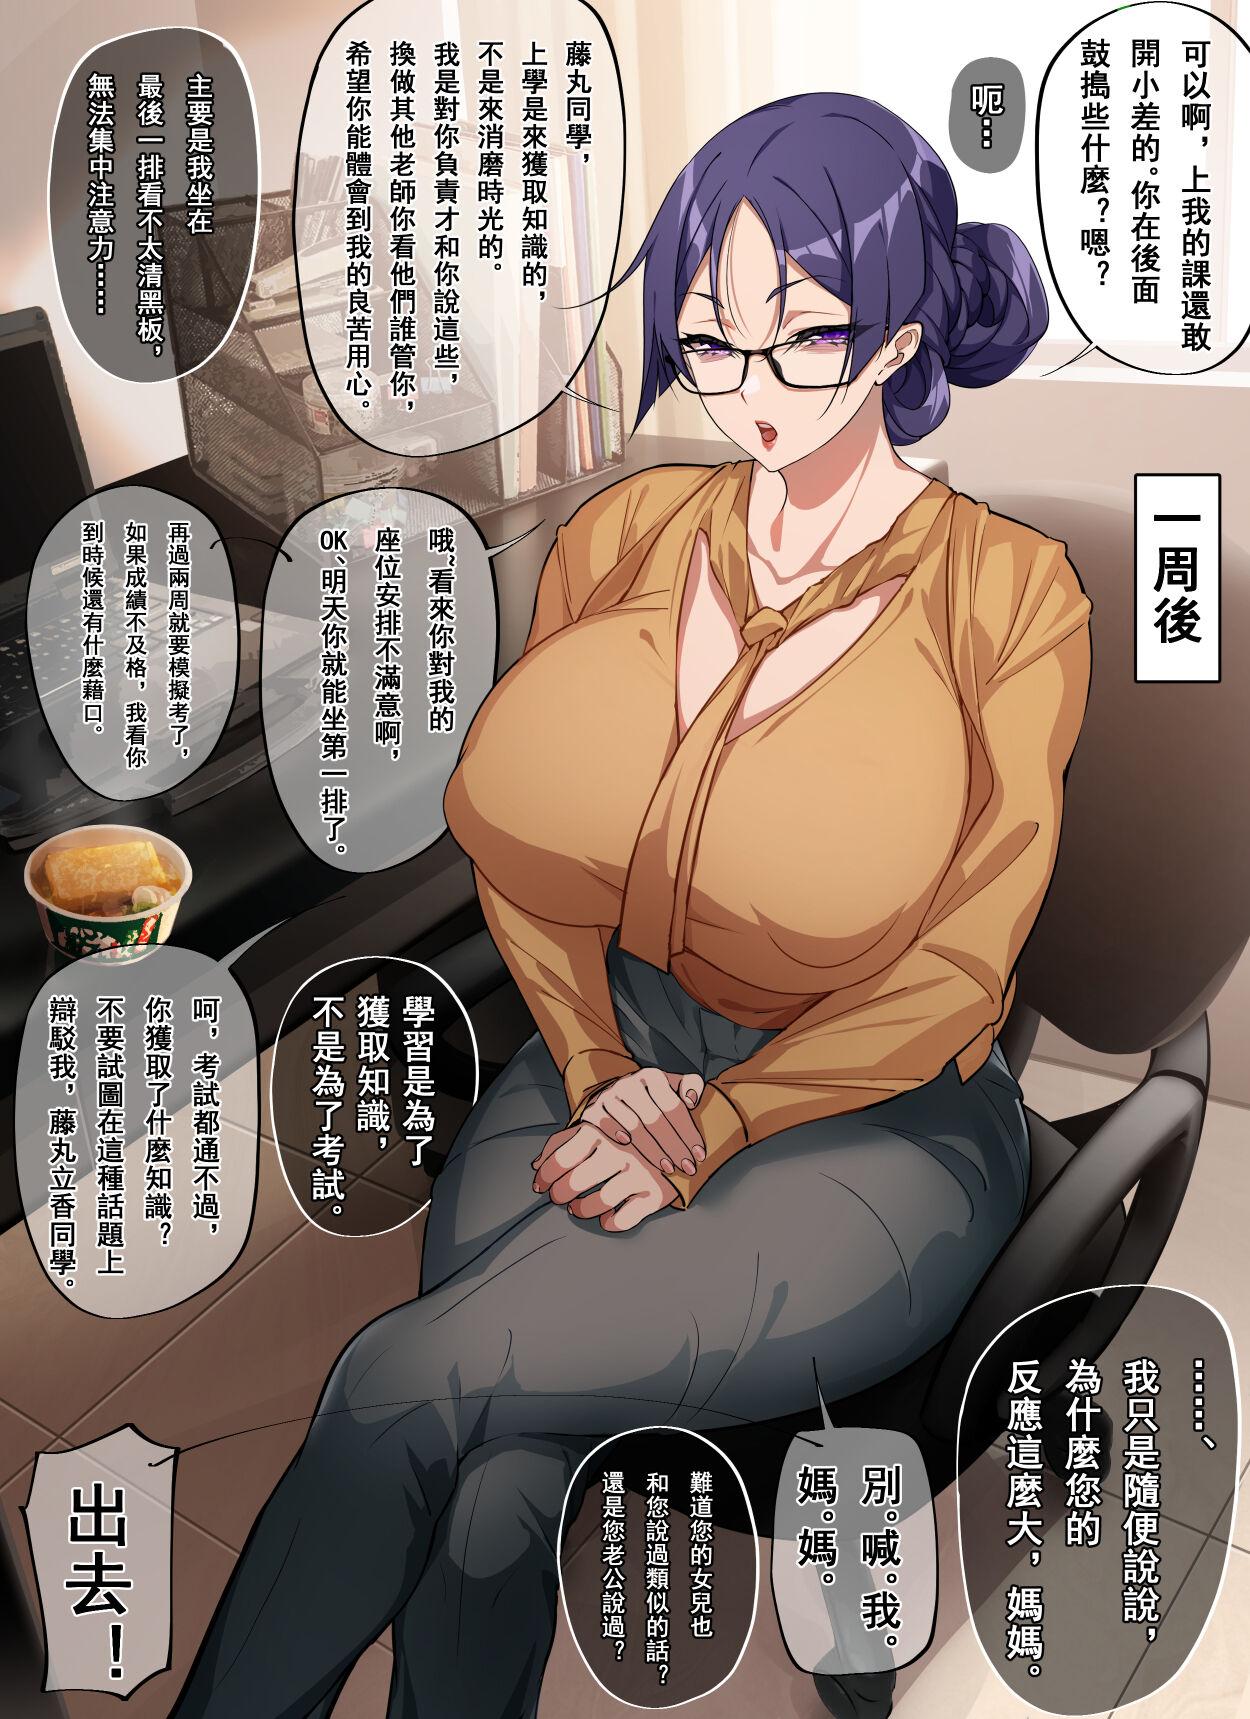 Cam Girl Teacher, can I call you mom? - Fate grand order Van - Page 2